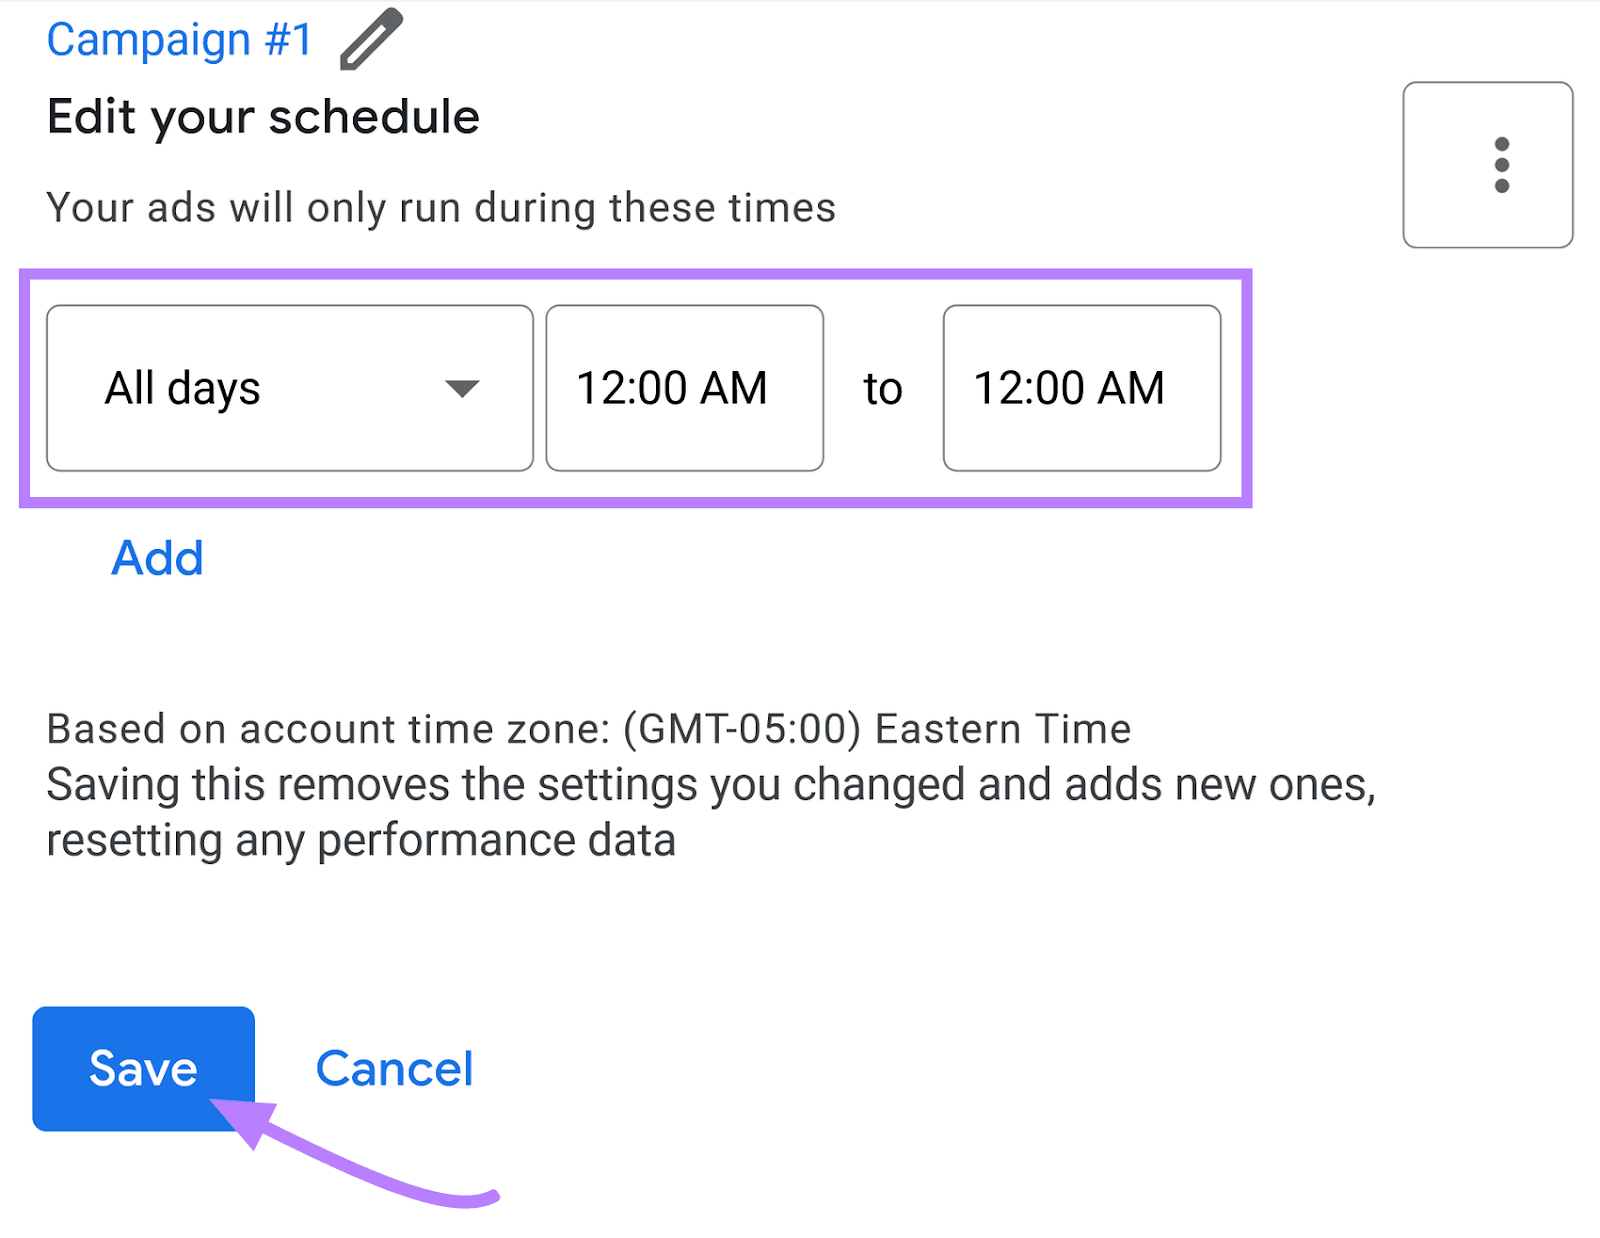 Edit your campaign schedule and click "Save"